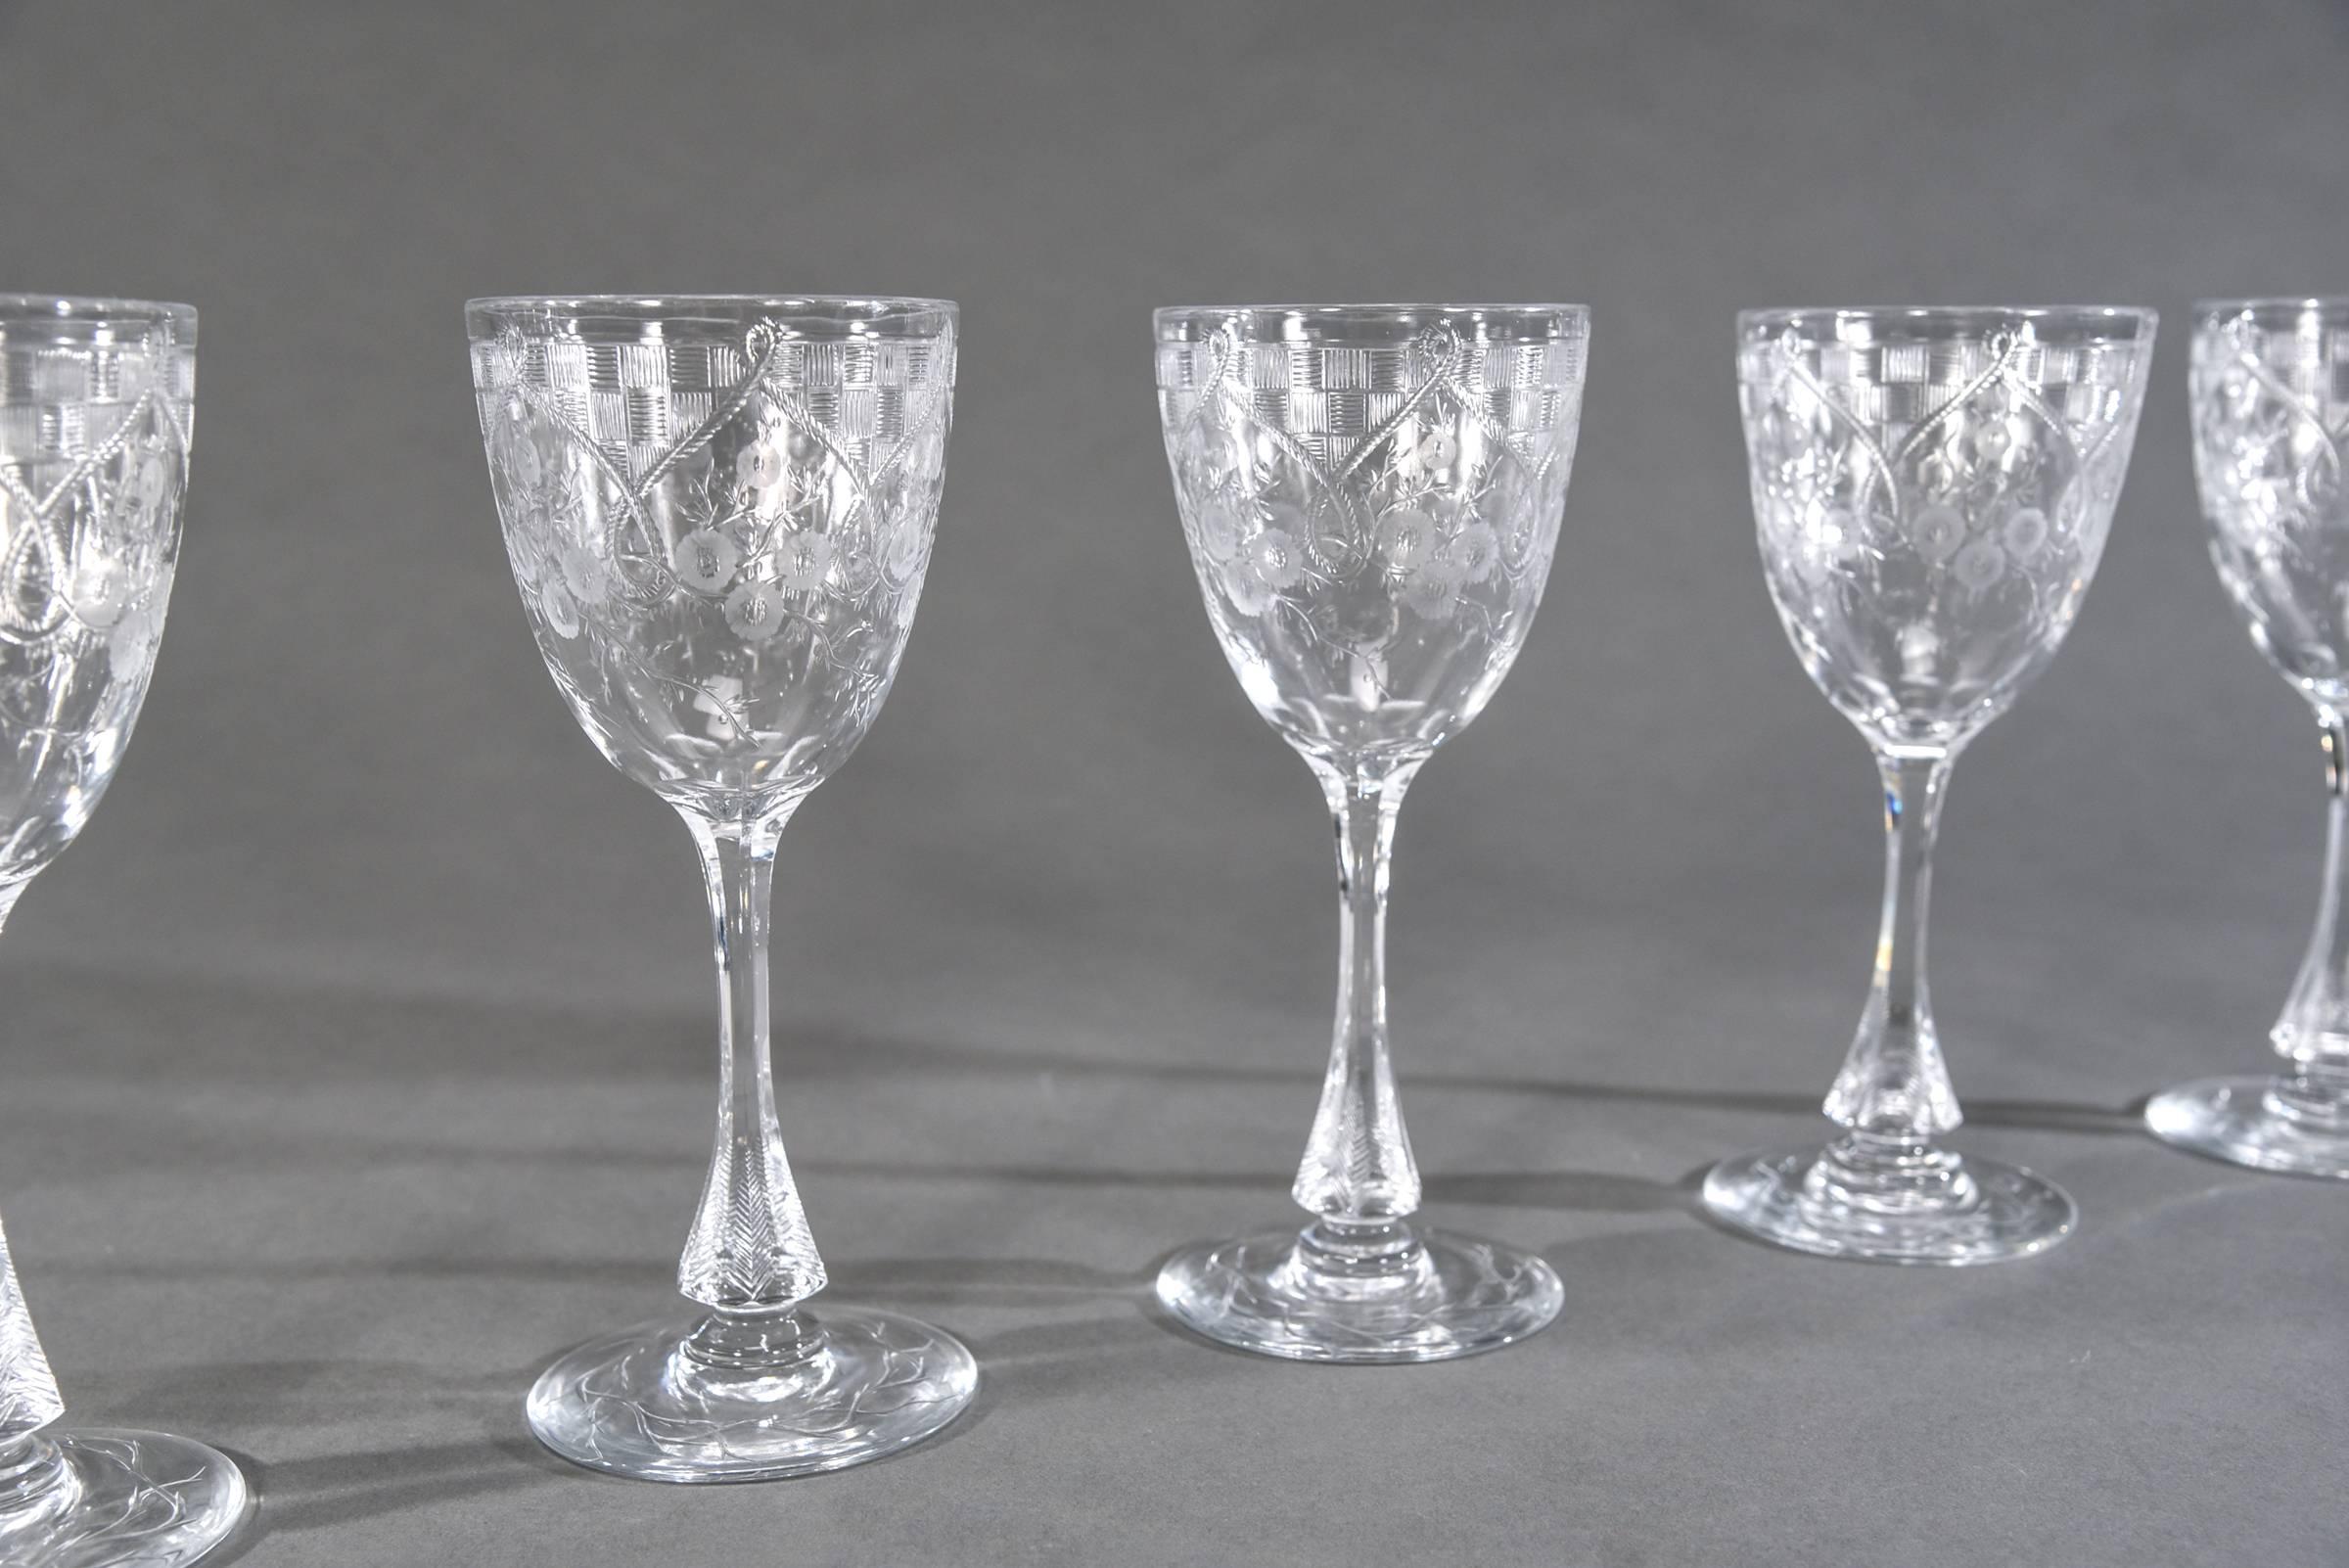 This is a fabulous set of 16 handblown crystal goblets made in England by Webb Corbett. What makes these stand out is their size as well as the unusual engraved decoration. The wheel cutting incorporates both linear and floral design making these